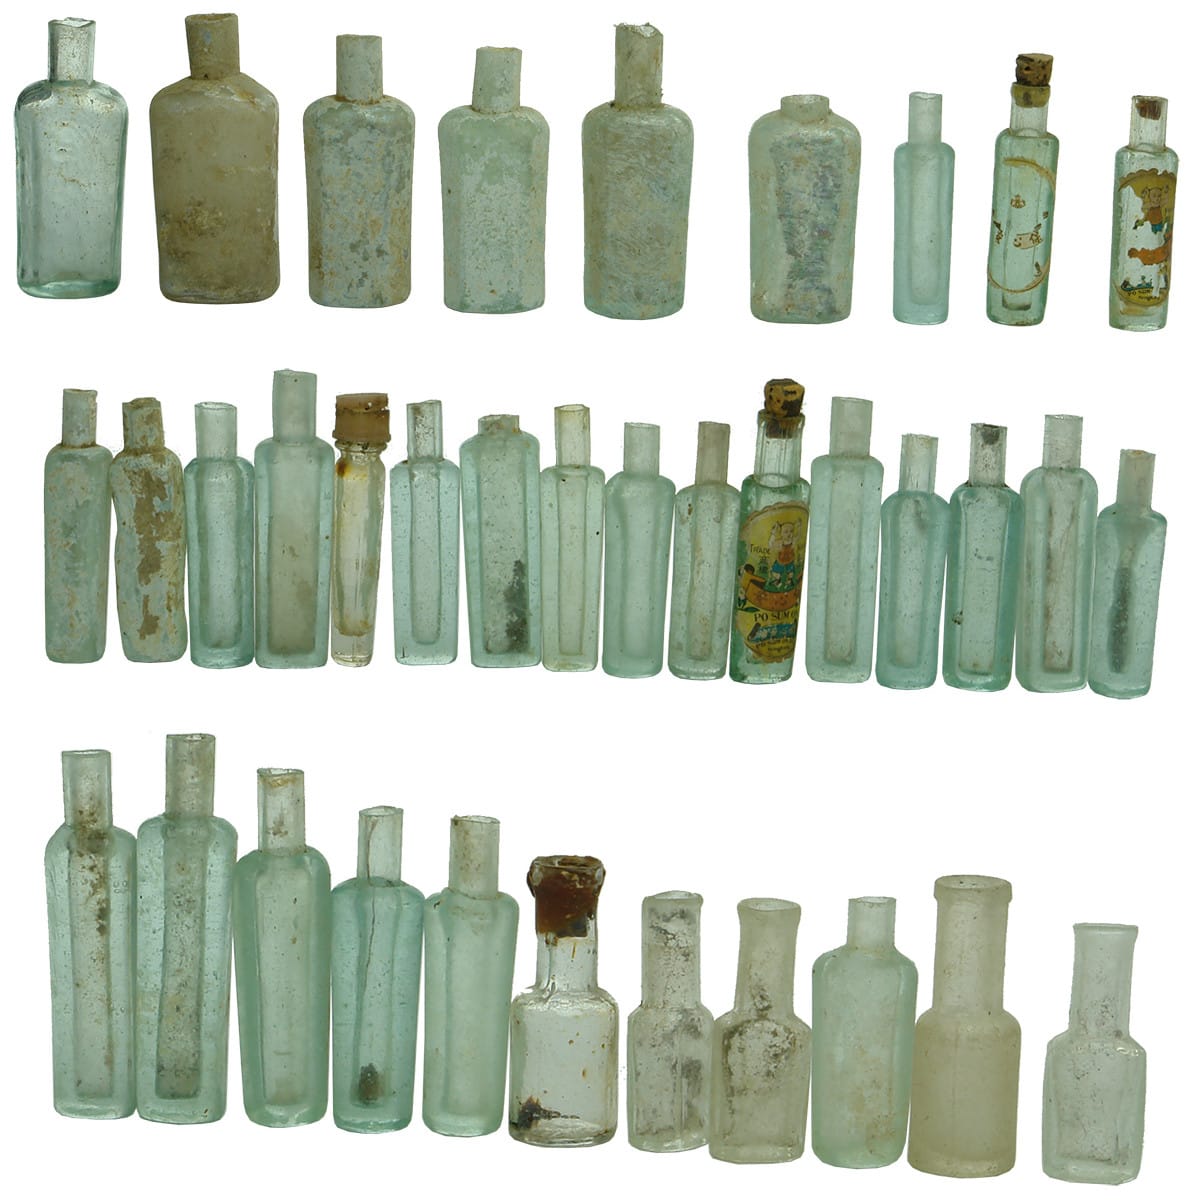 30 odd little Chinese Oil and medicine bottles.